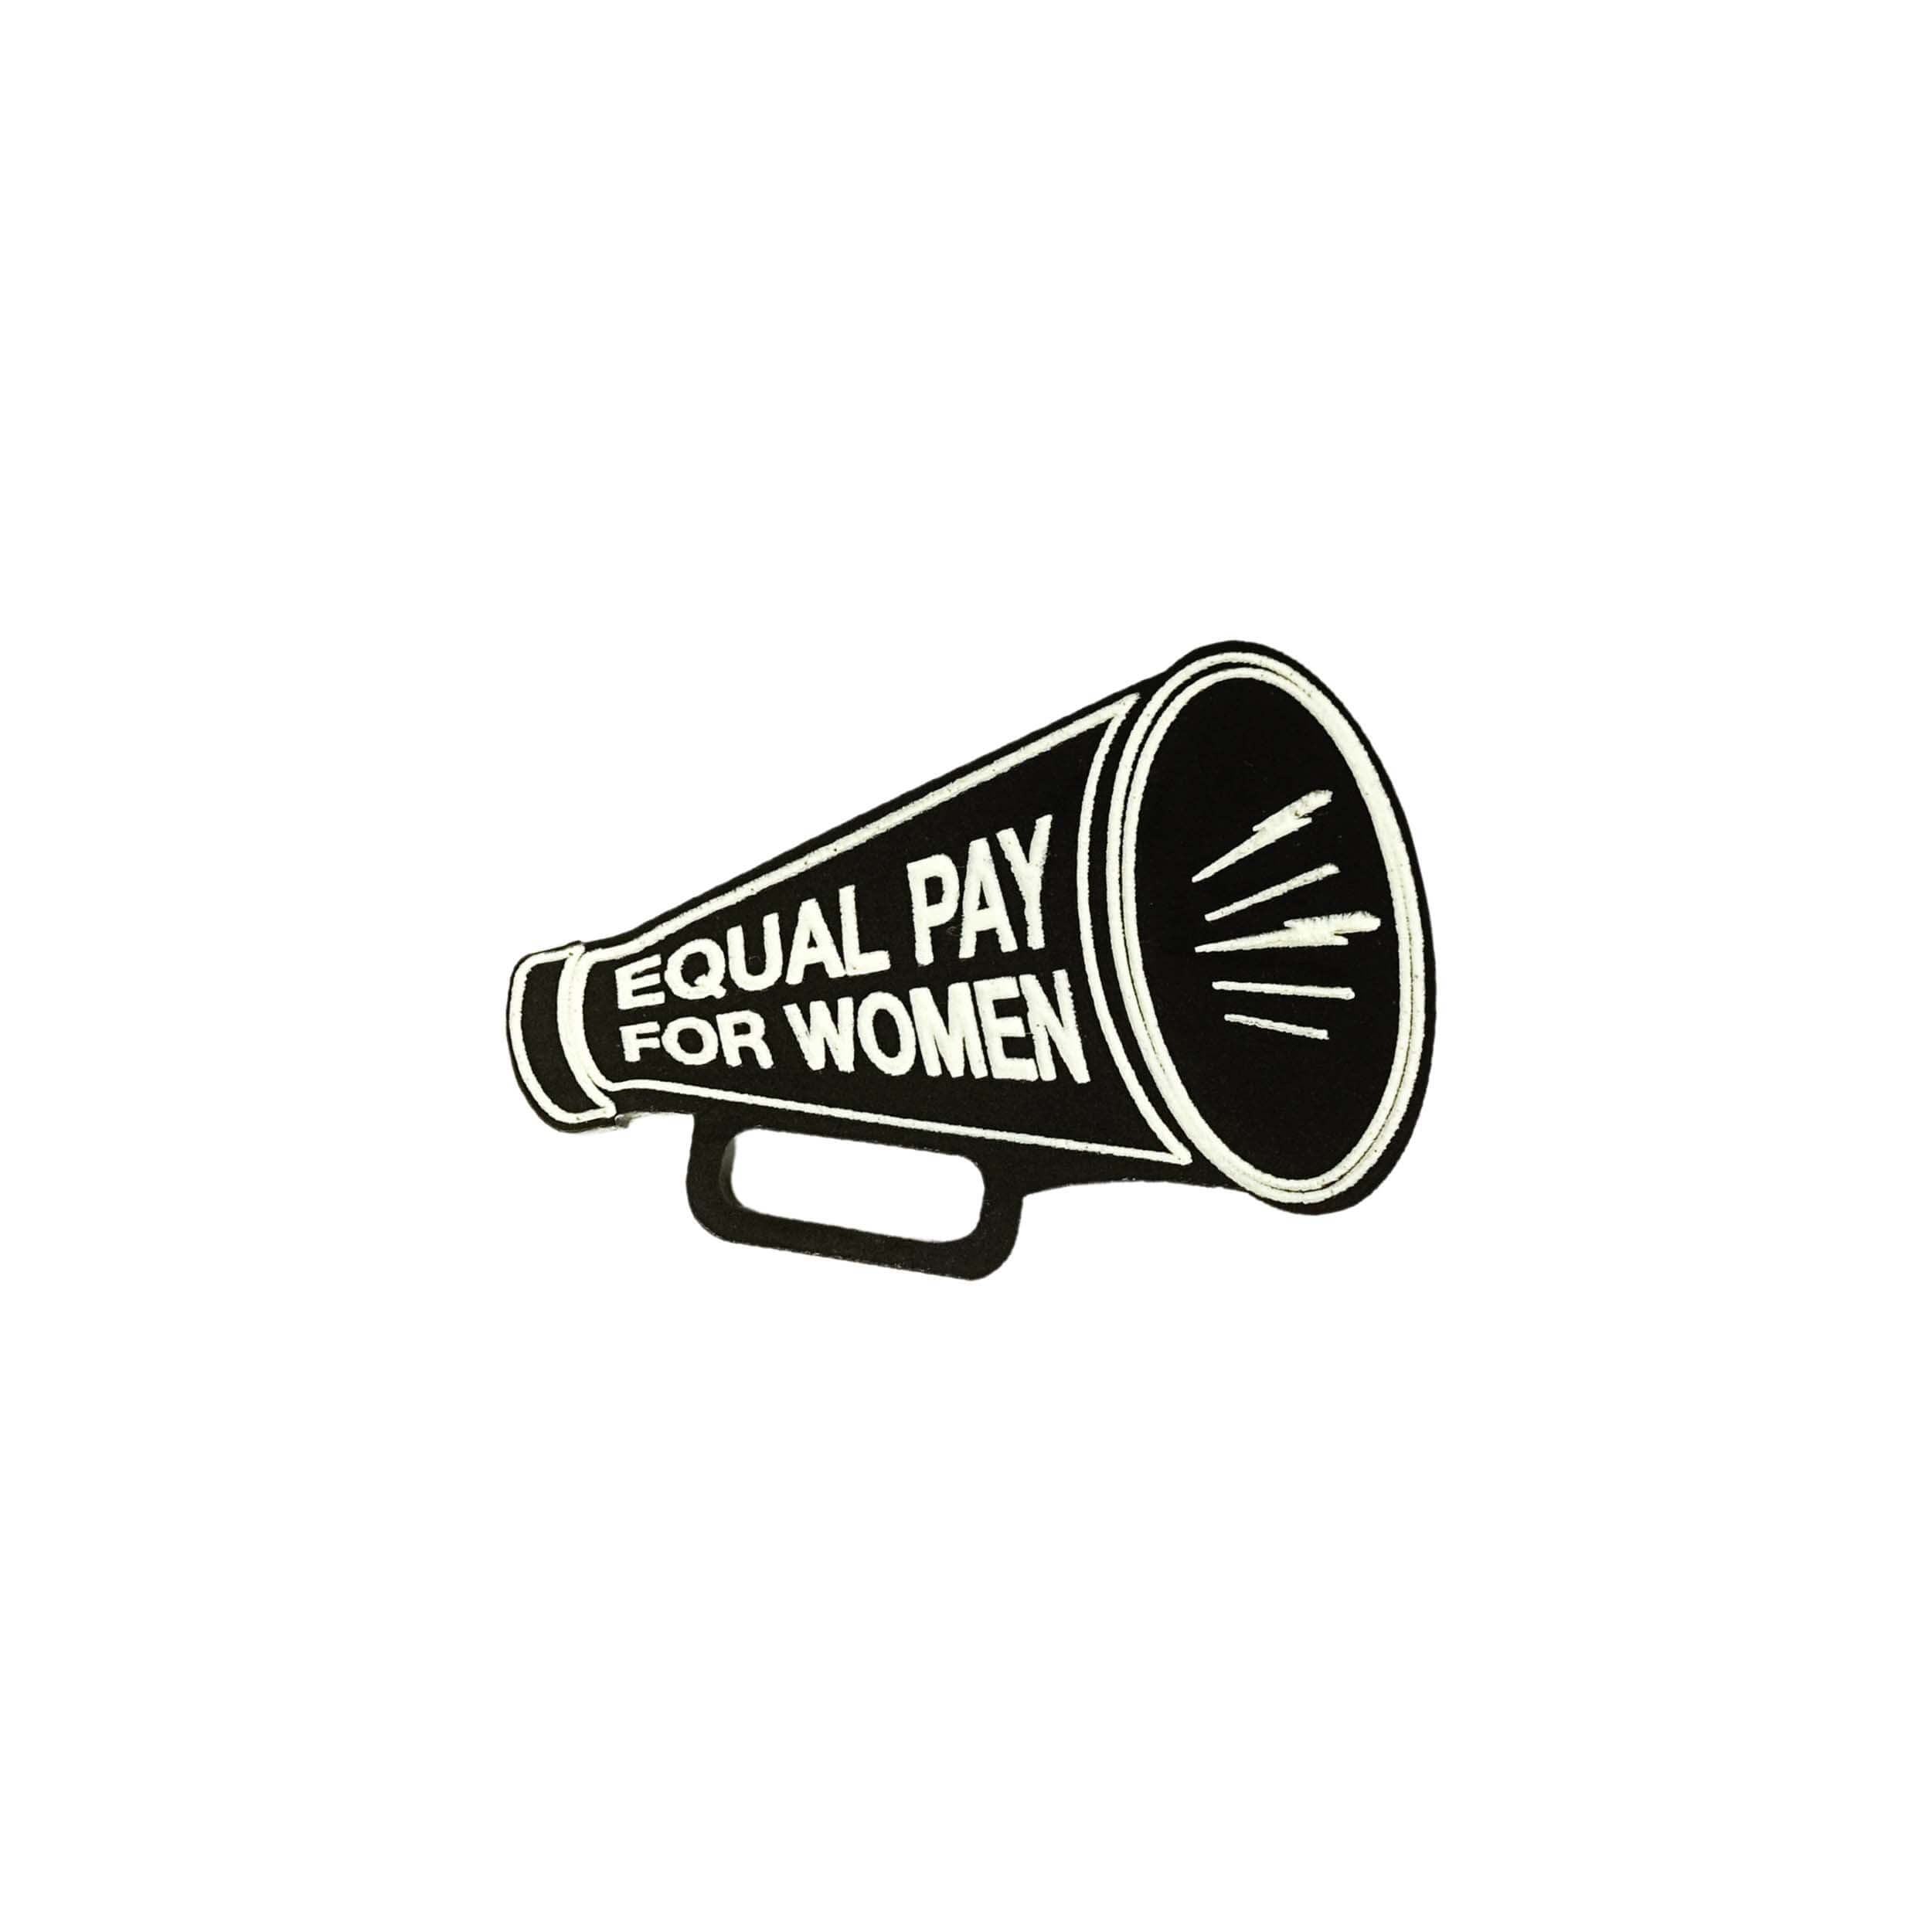 EQUAL PAY FOR WOMEN Megaphone brooch. How are we still being paid less. 